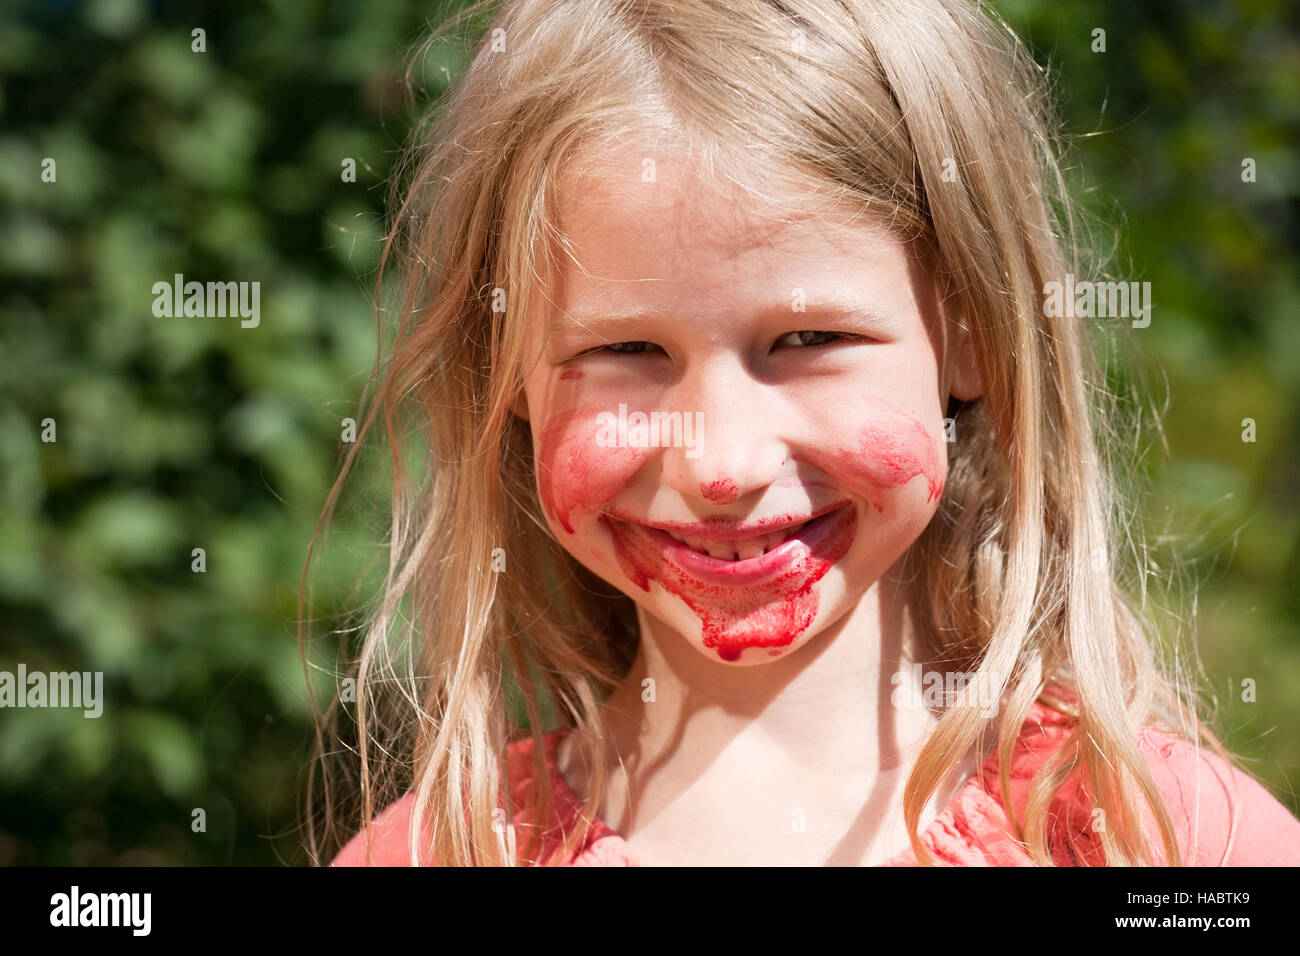 funny smiling little girl with red juice on cheeks and chin Stock Photo